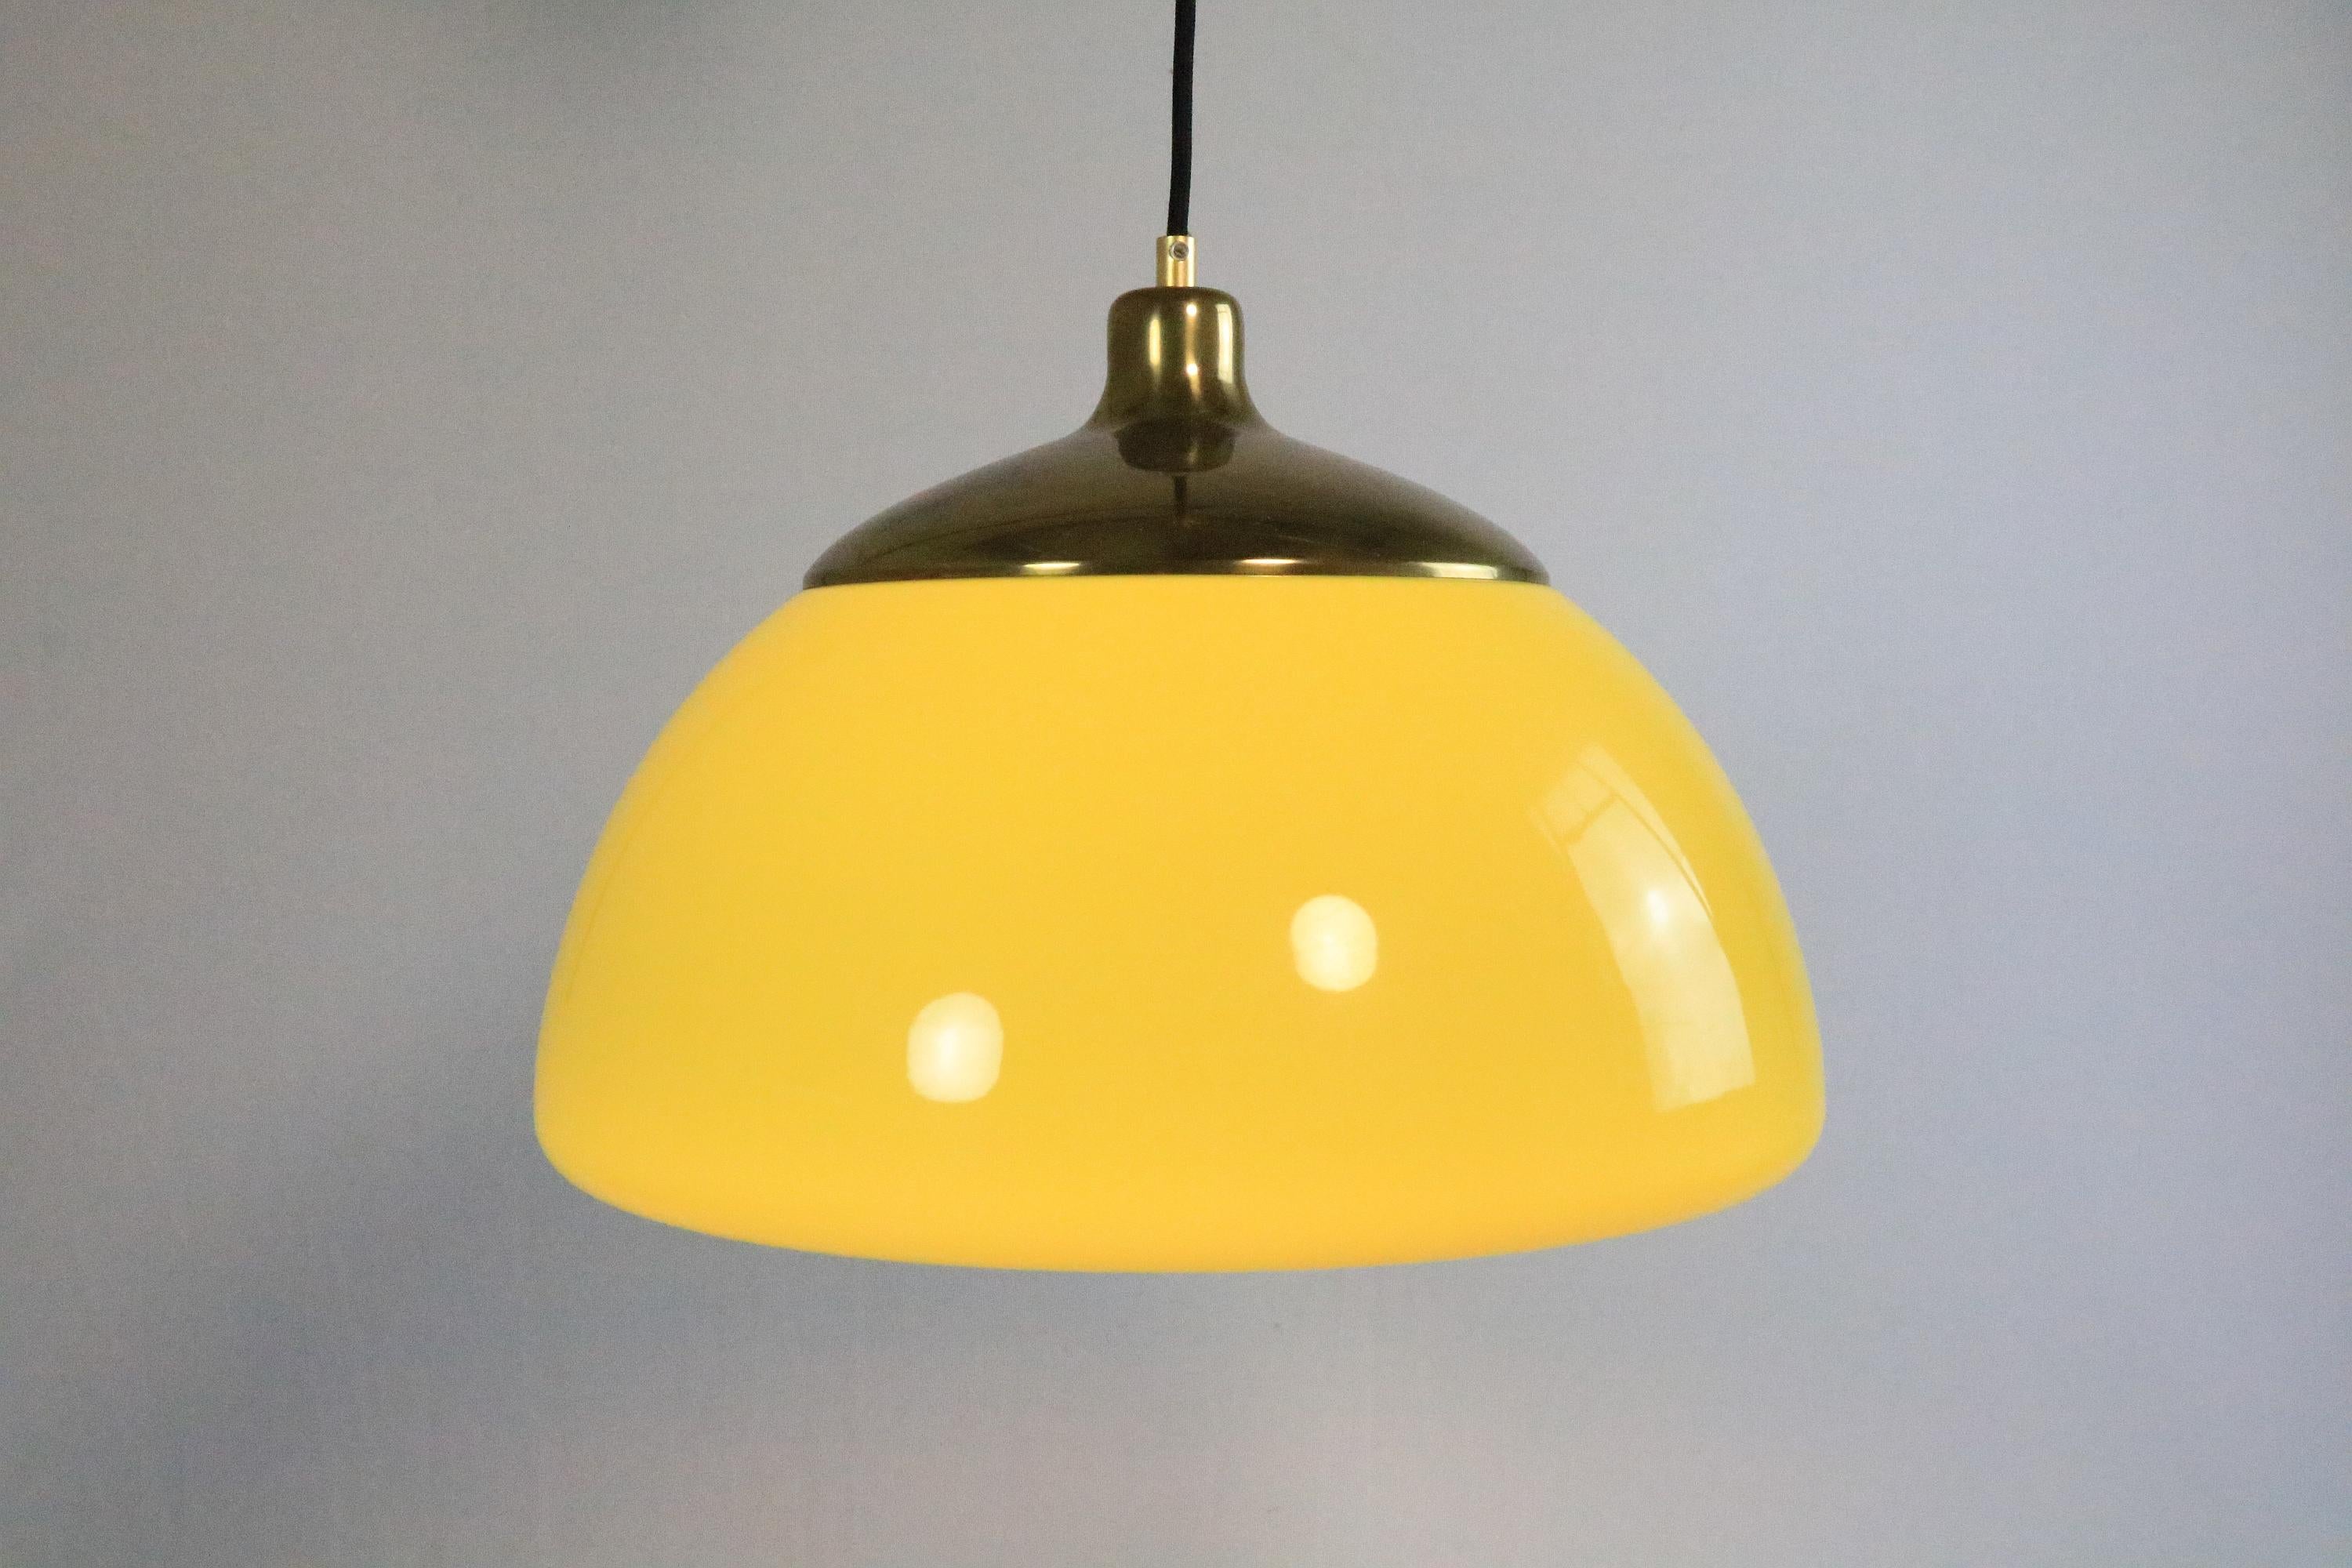 Beautiful Hanging Lamp by Cosack, Germany.

Very rare colour. The Yellow changes into a warmer tone, when the light is on.
The attractive color is complemented by the brass parts.

The former adjustable spirale cable was exchanged for a more